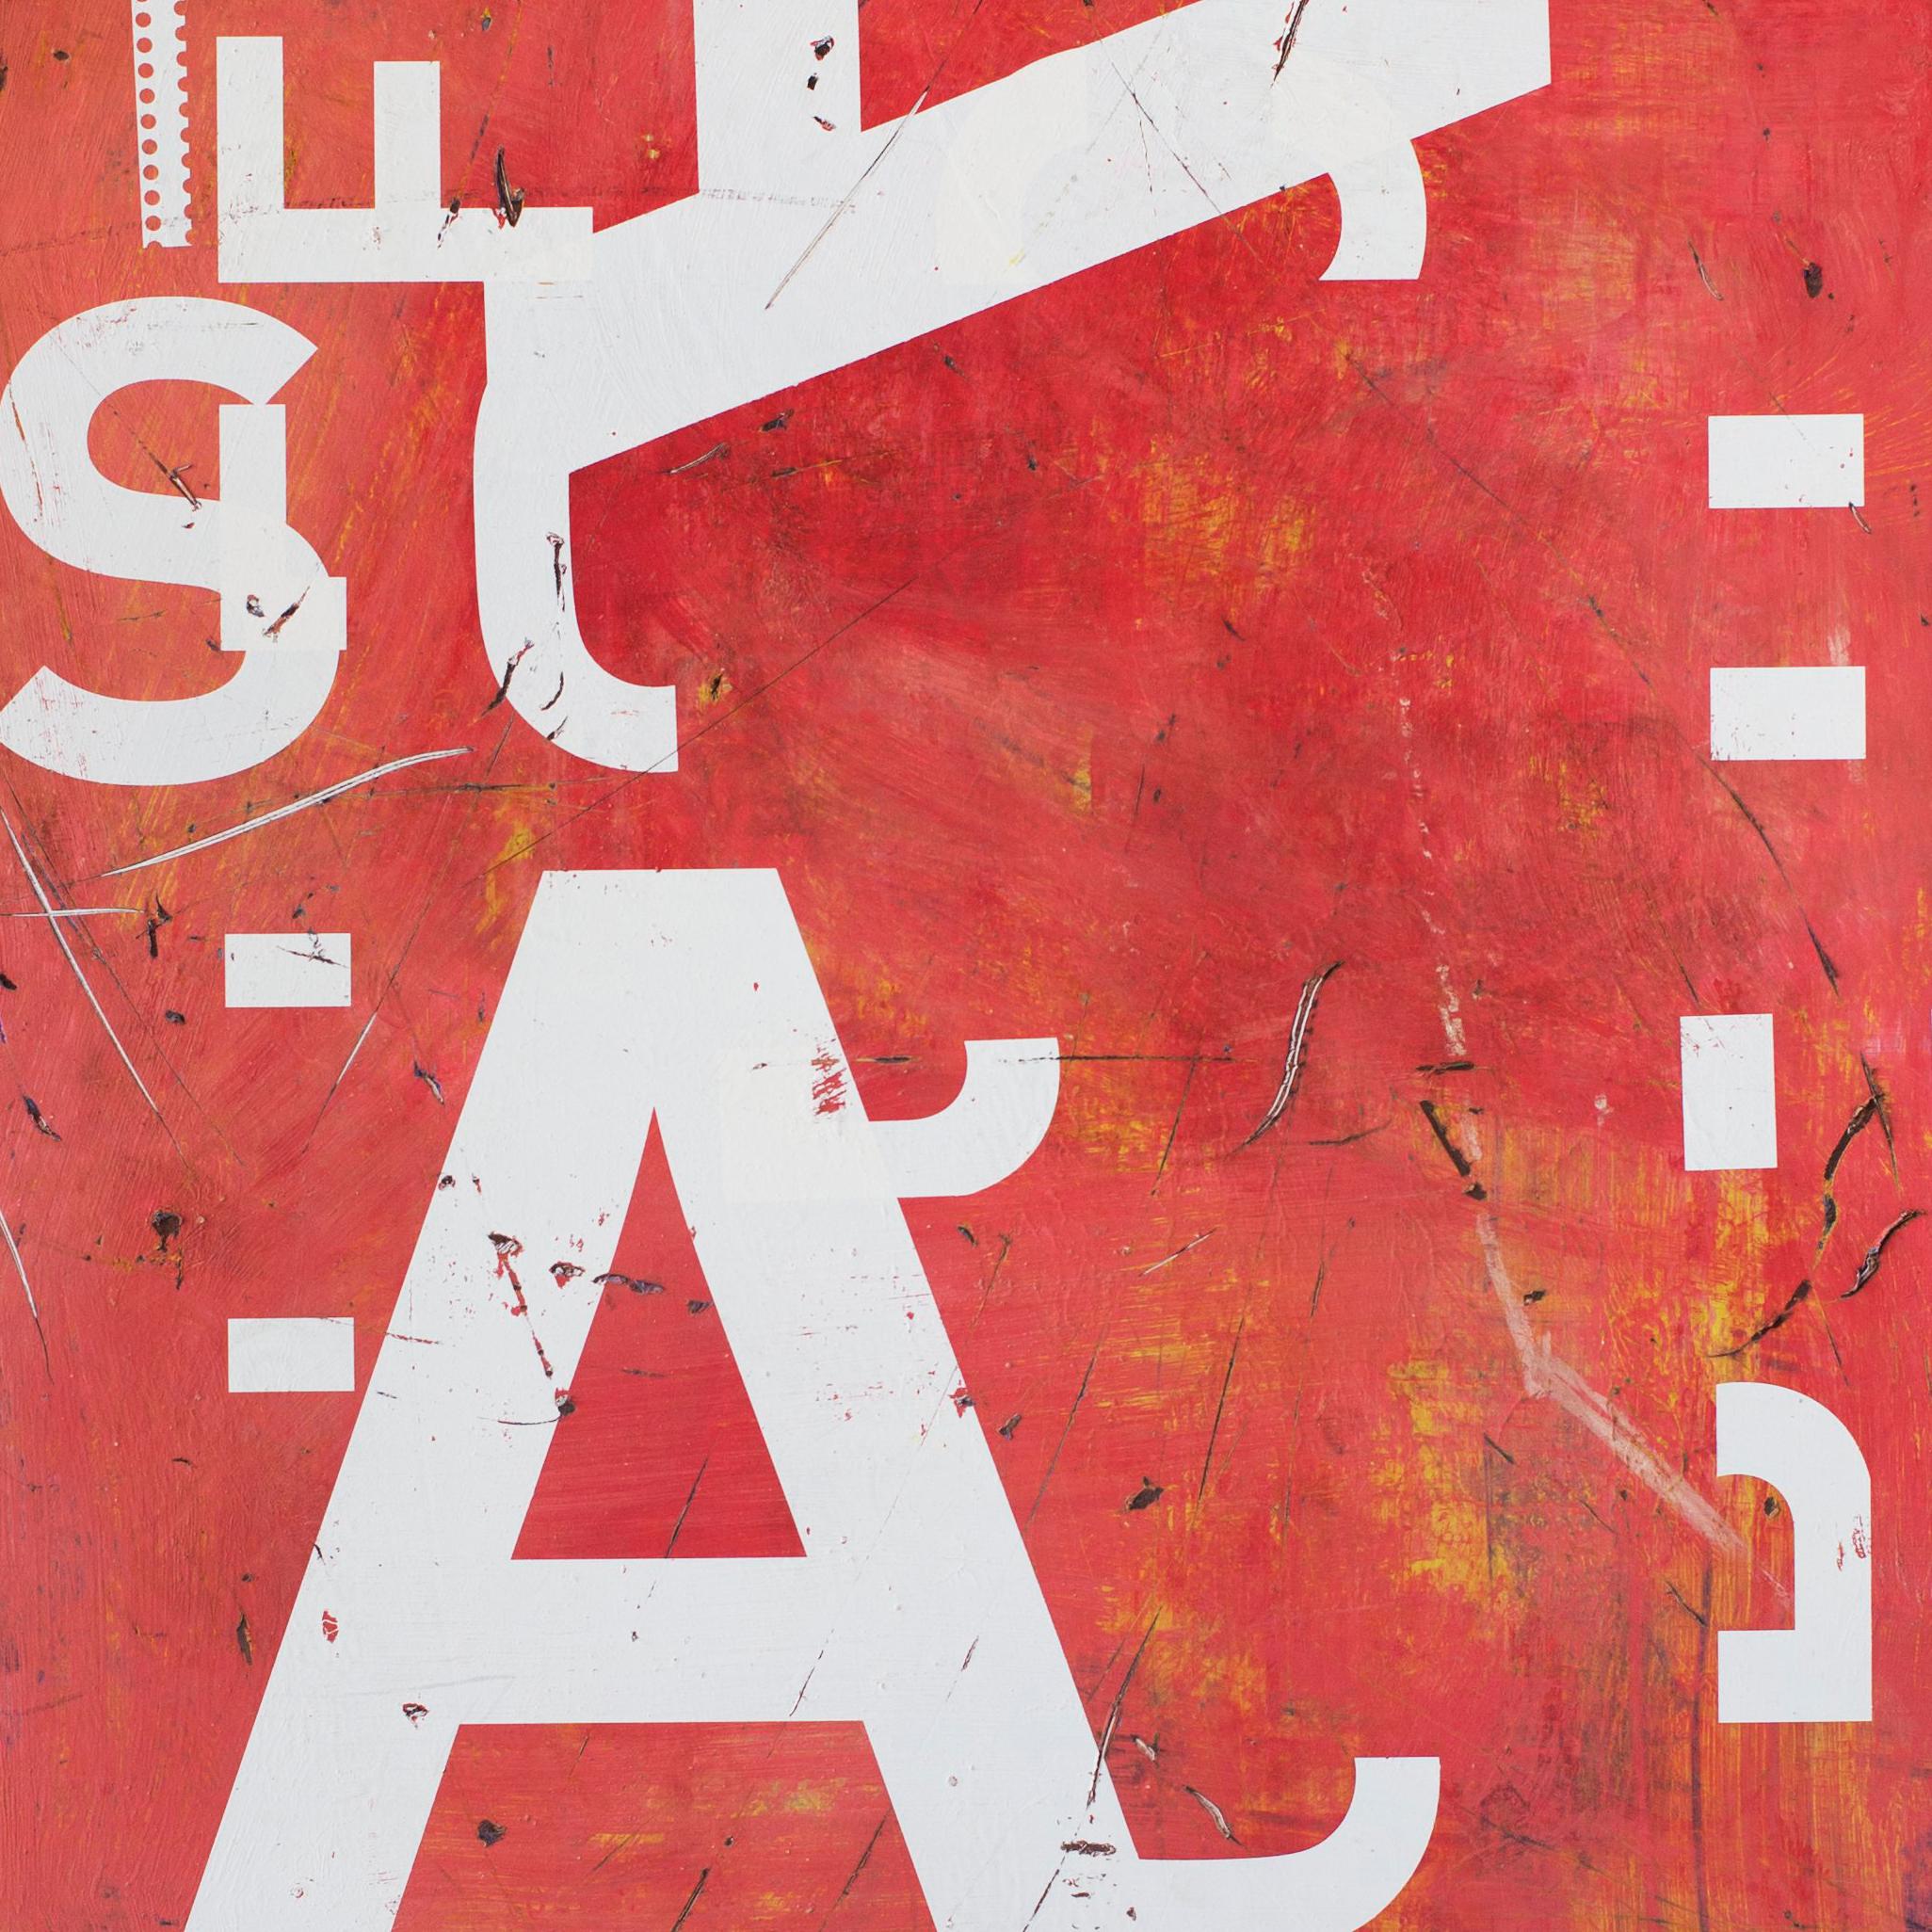 Grand AA (Typography series) by Ramon Enrich - large abstract painting, red For Sale 1